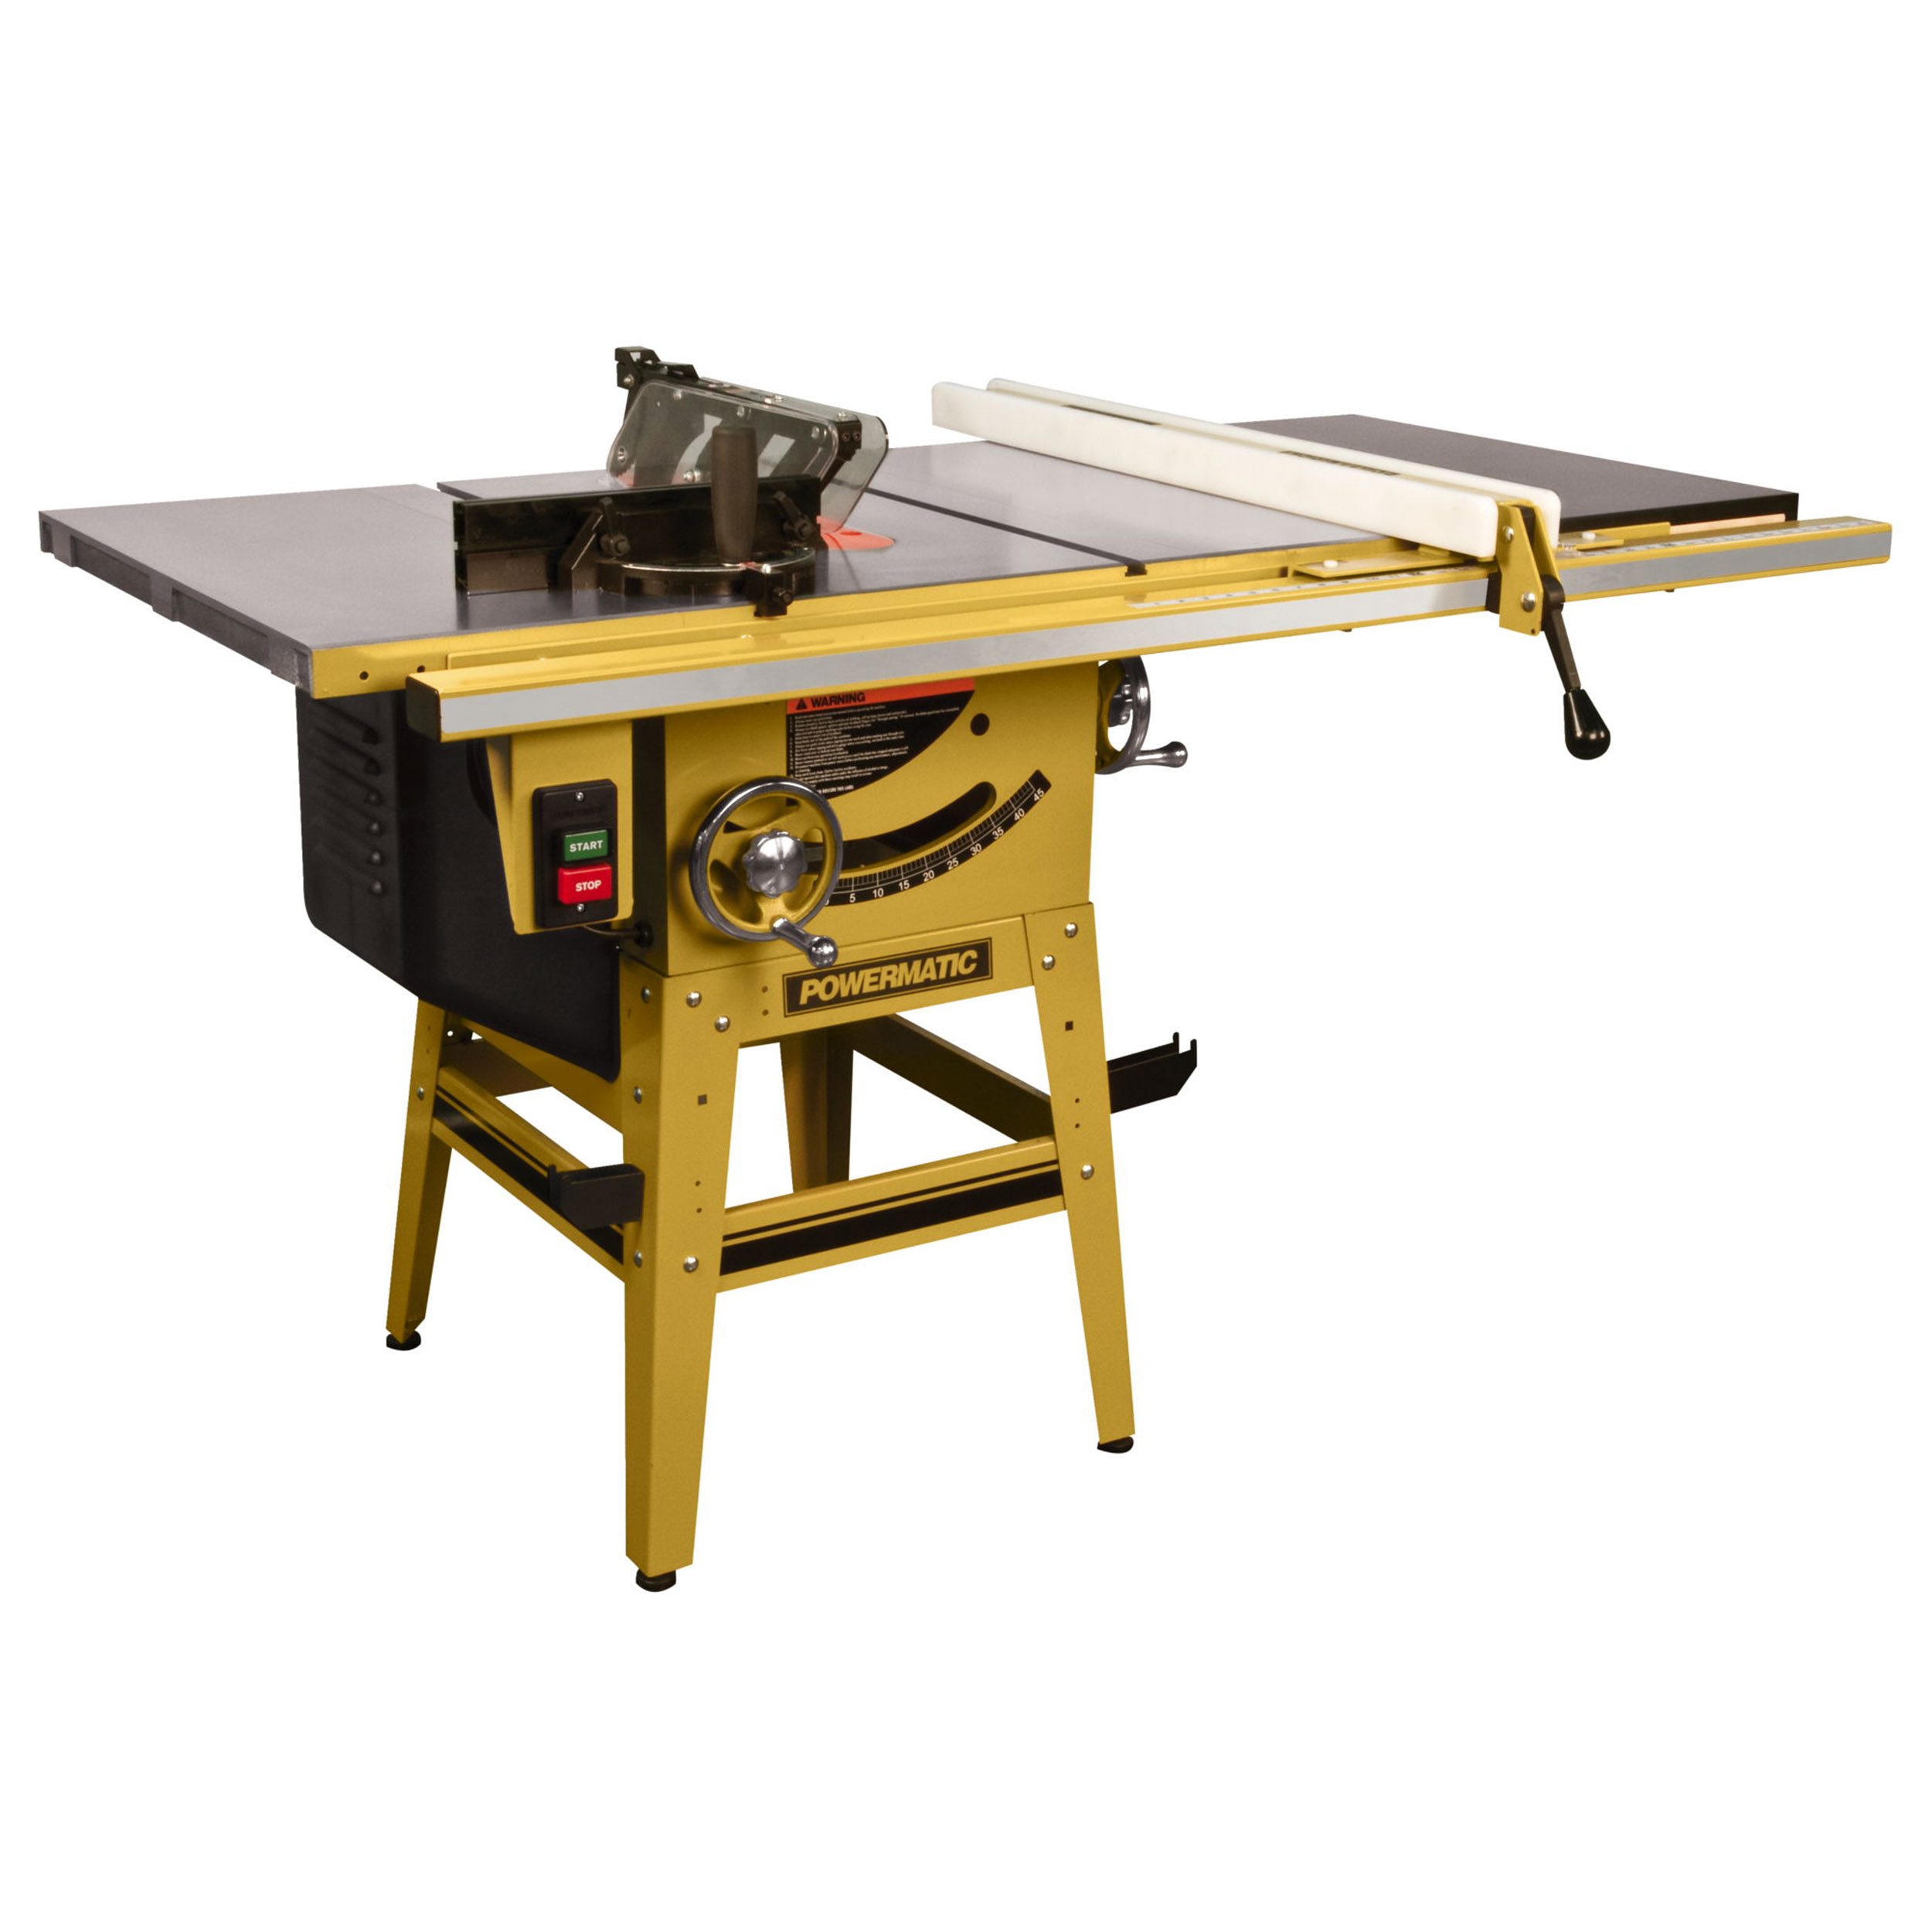 Table Saw, 1-3/4hp, 50" Fence With Riving Knife, Model 64b-50